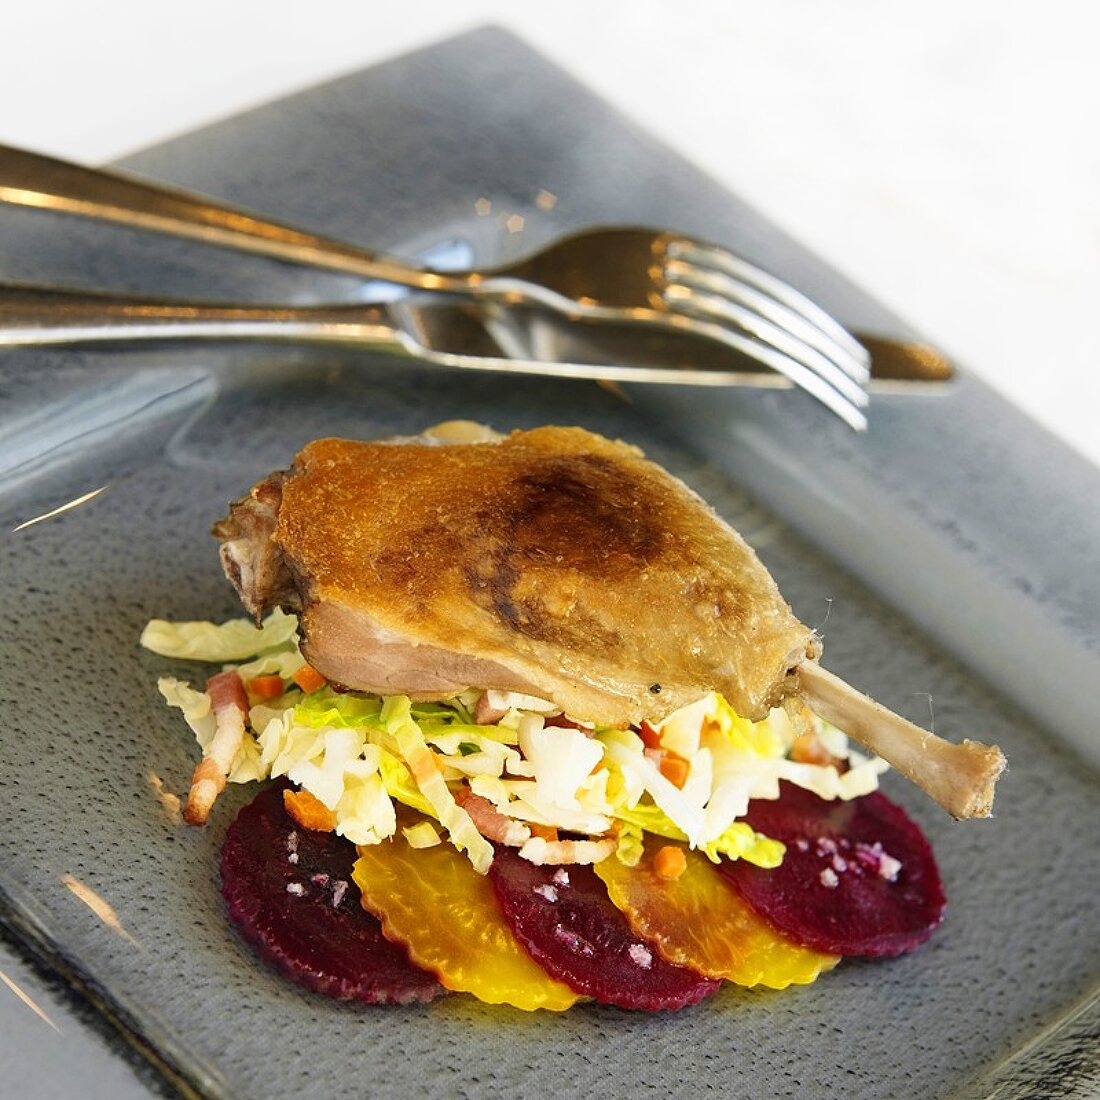 Duck Leg Over Coleslaw with Sliced Red and Yellow Beets